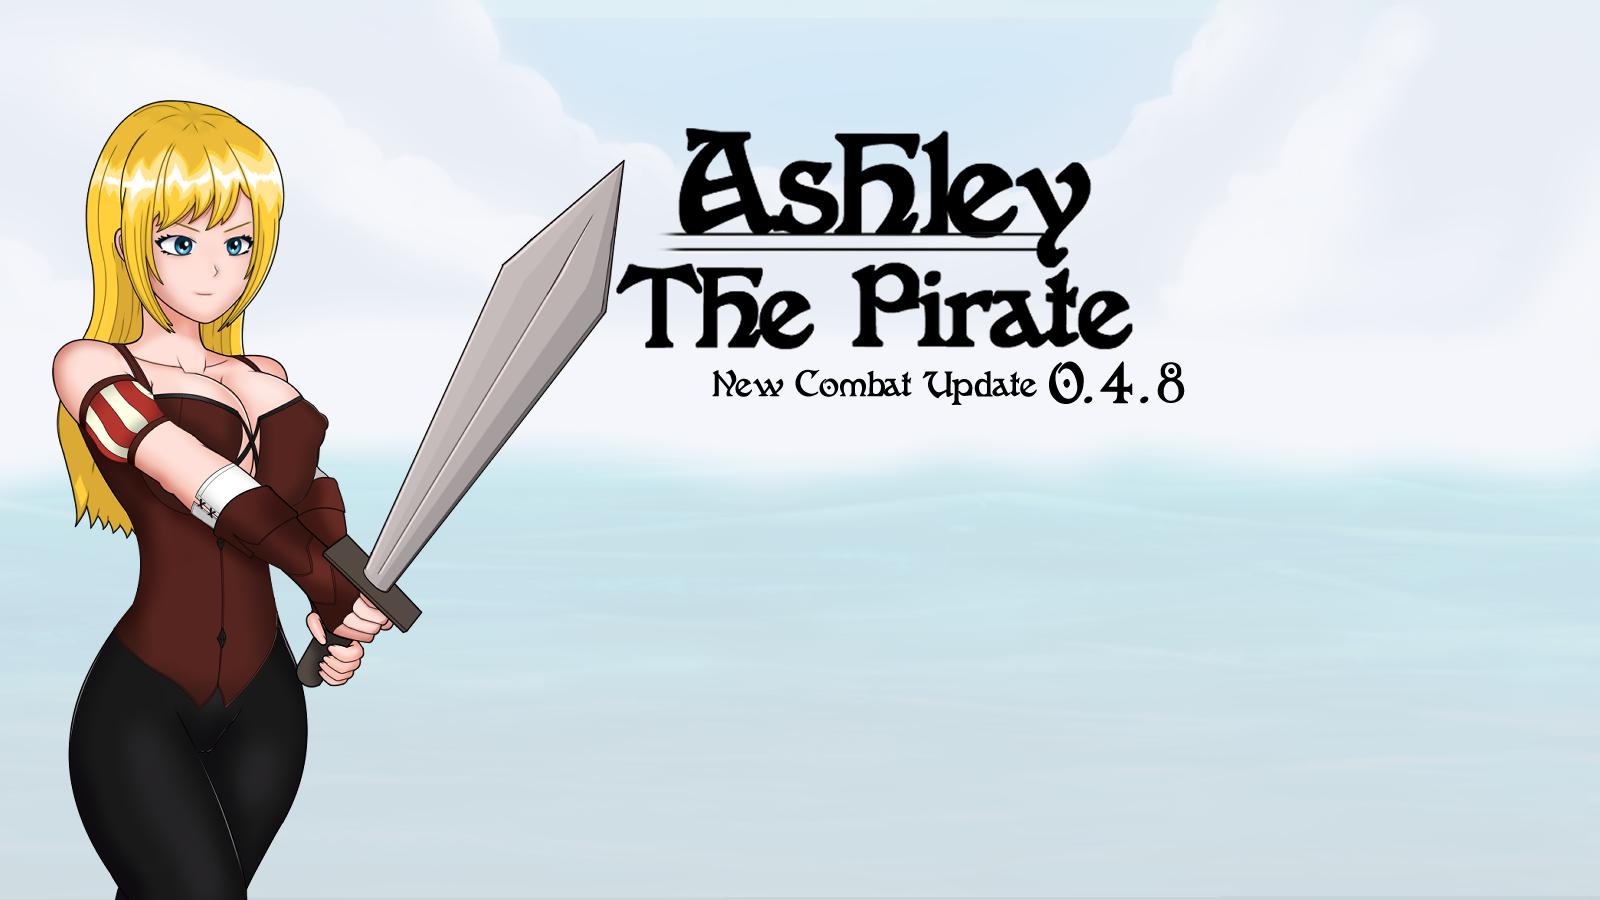 Ashley the pirate